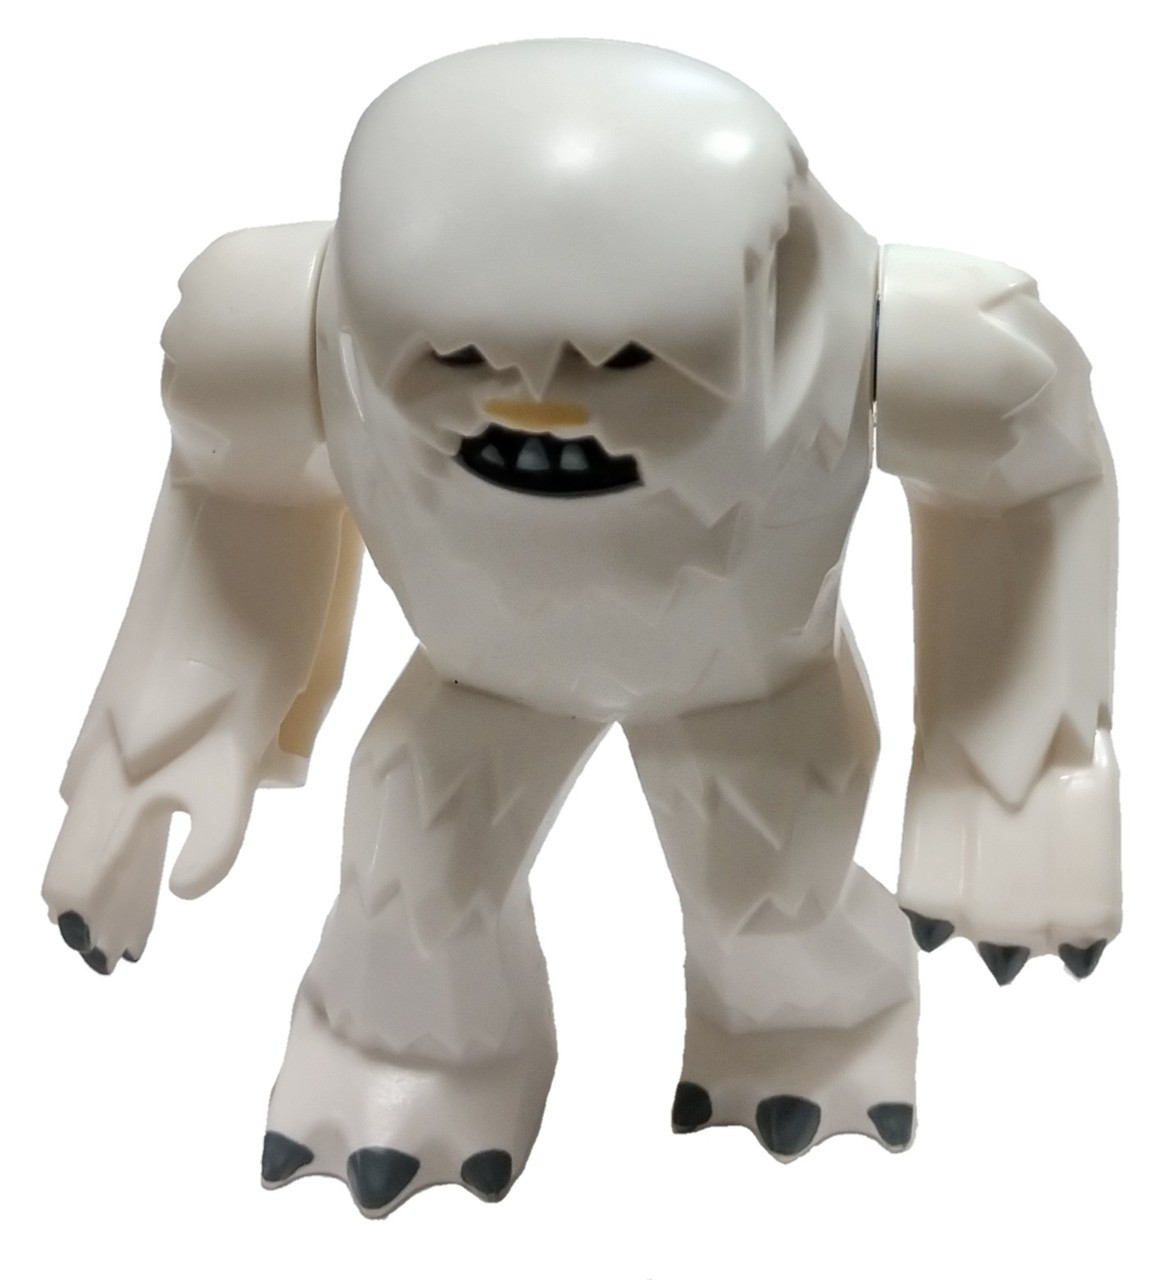 Lego Star Wars Empire Strikes Back Wampa Minifigure Without Horns Loose Toywiz - roblox venom horns